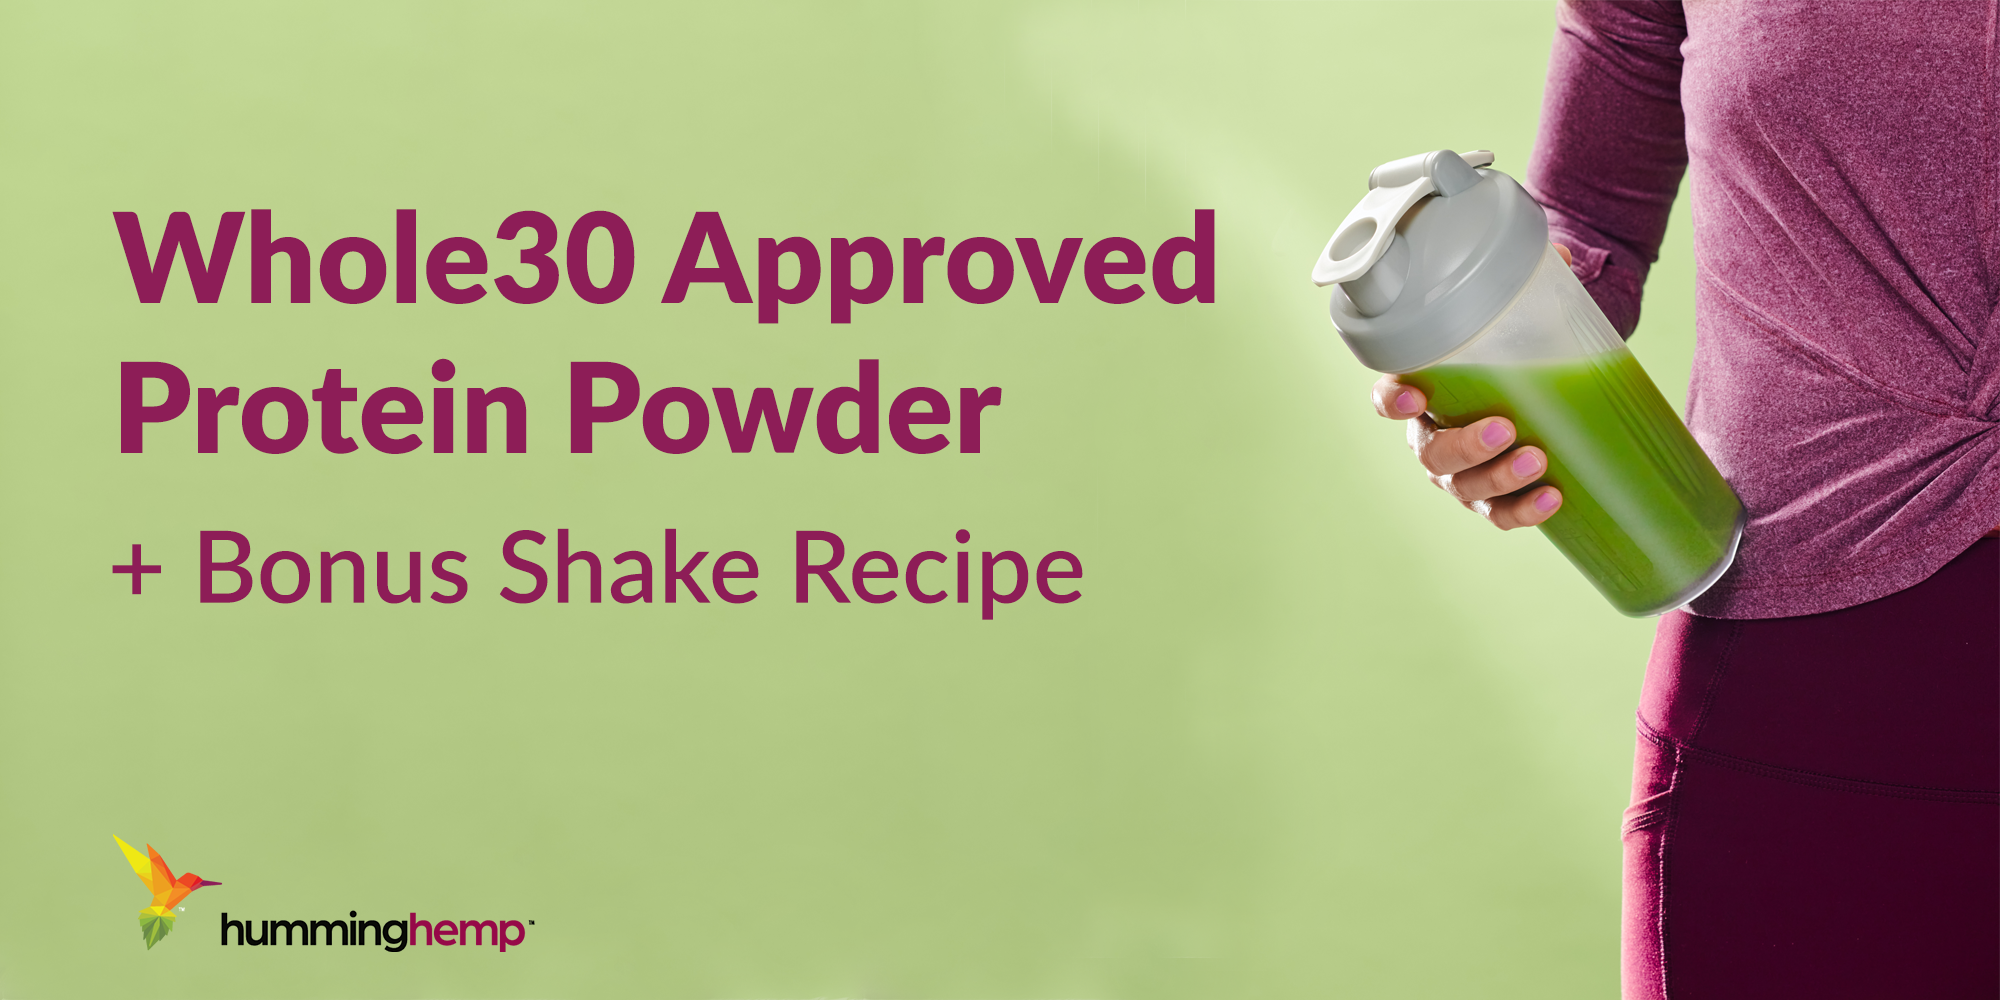 Whole30 Approved Protein Powder